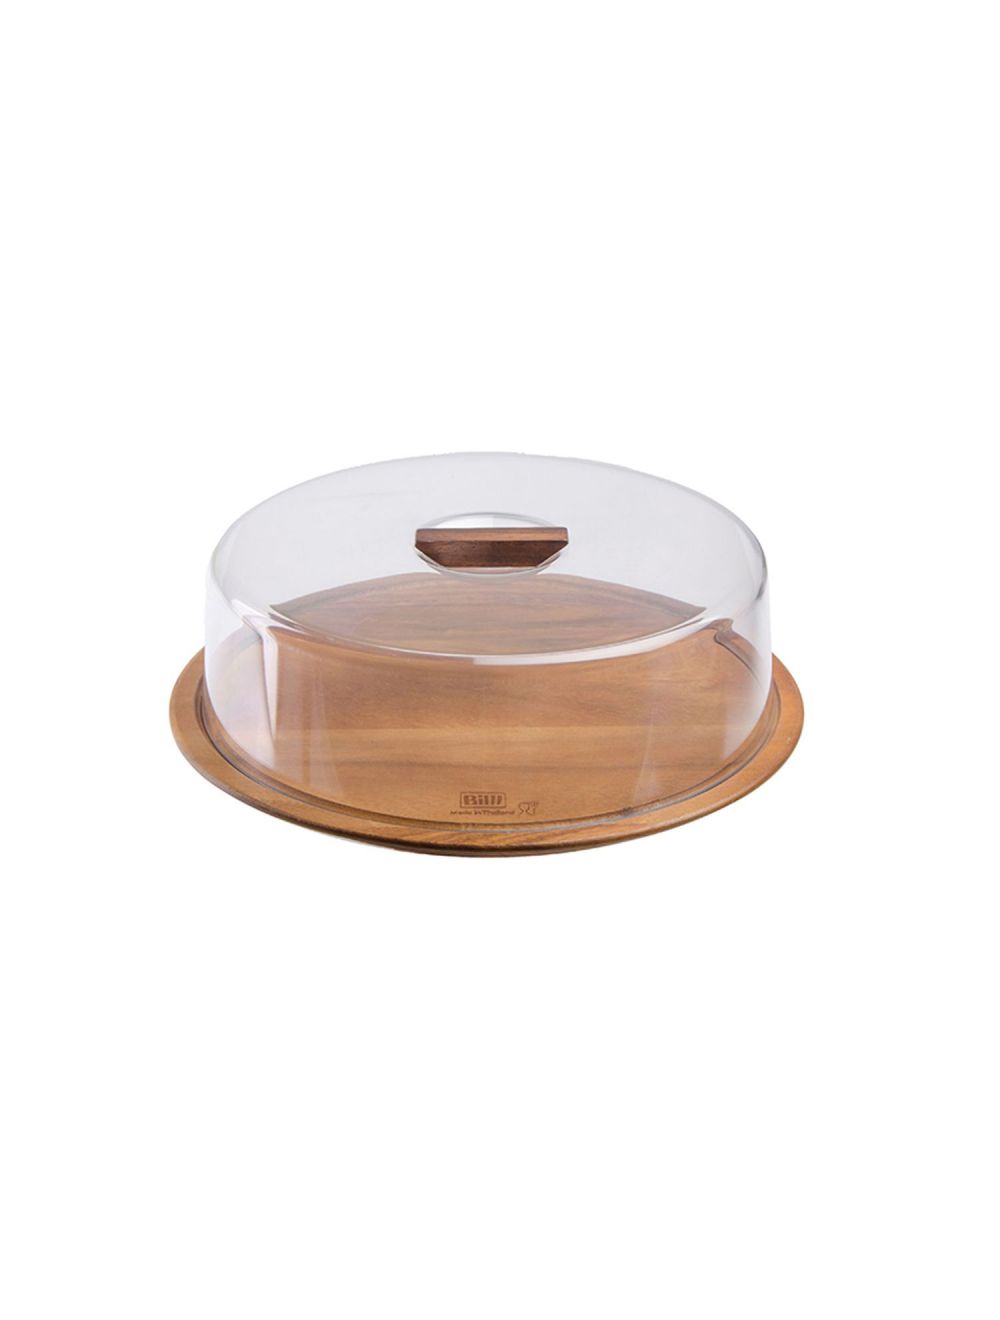 Billi Wooden Cheese Dome With Acrylic Cover Aca-913ce-GAHFK89002